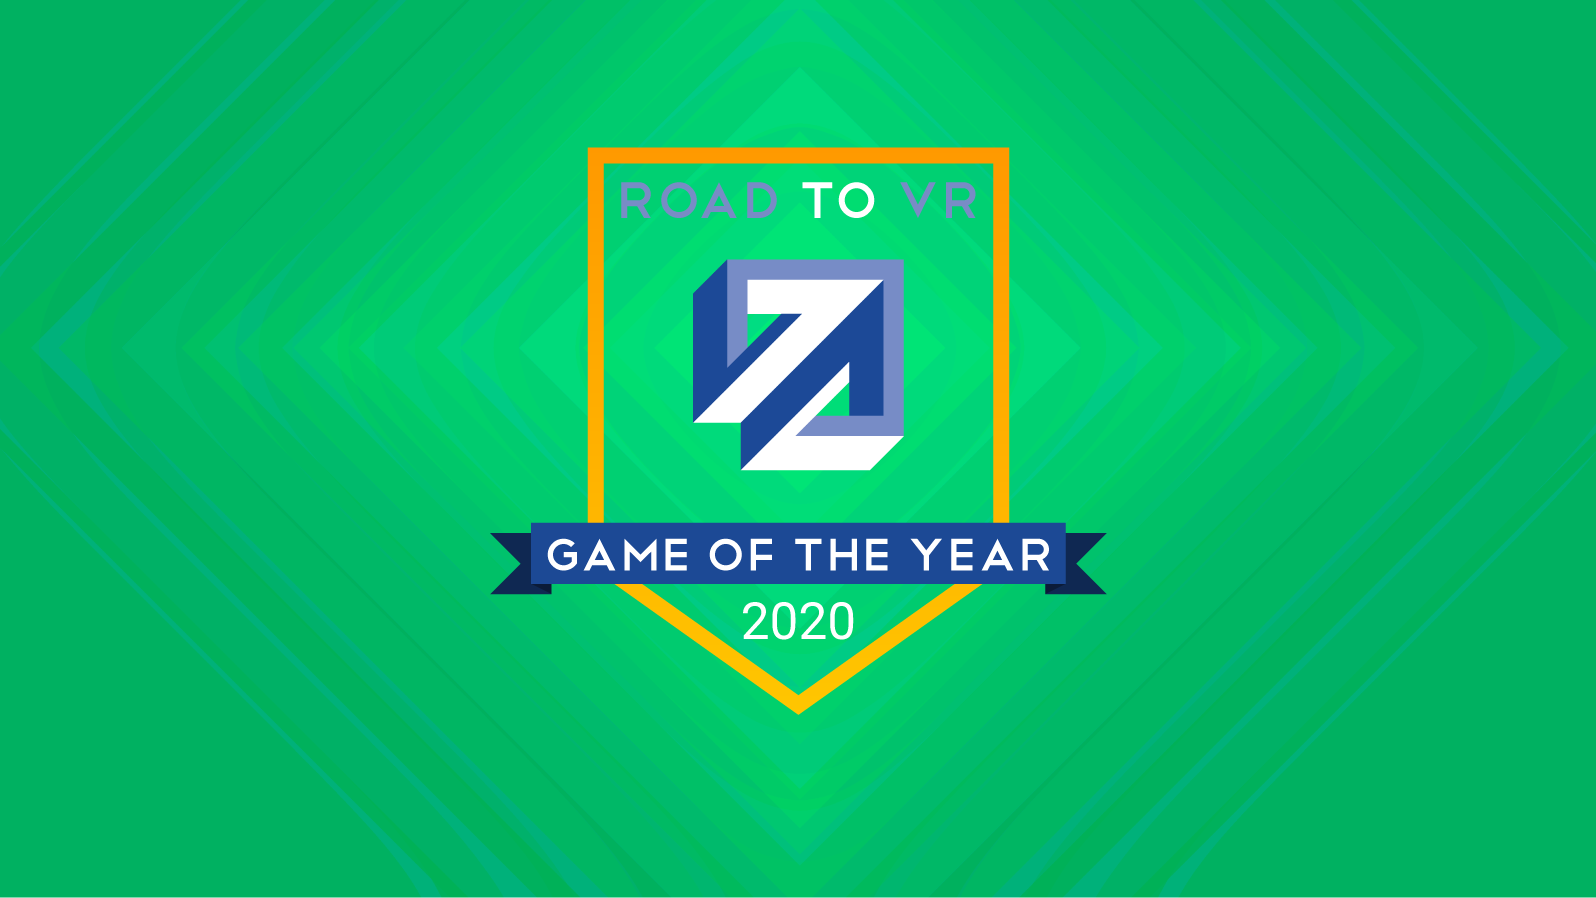 Road to VR’s 2020 Game of the Year Awards